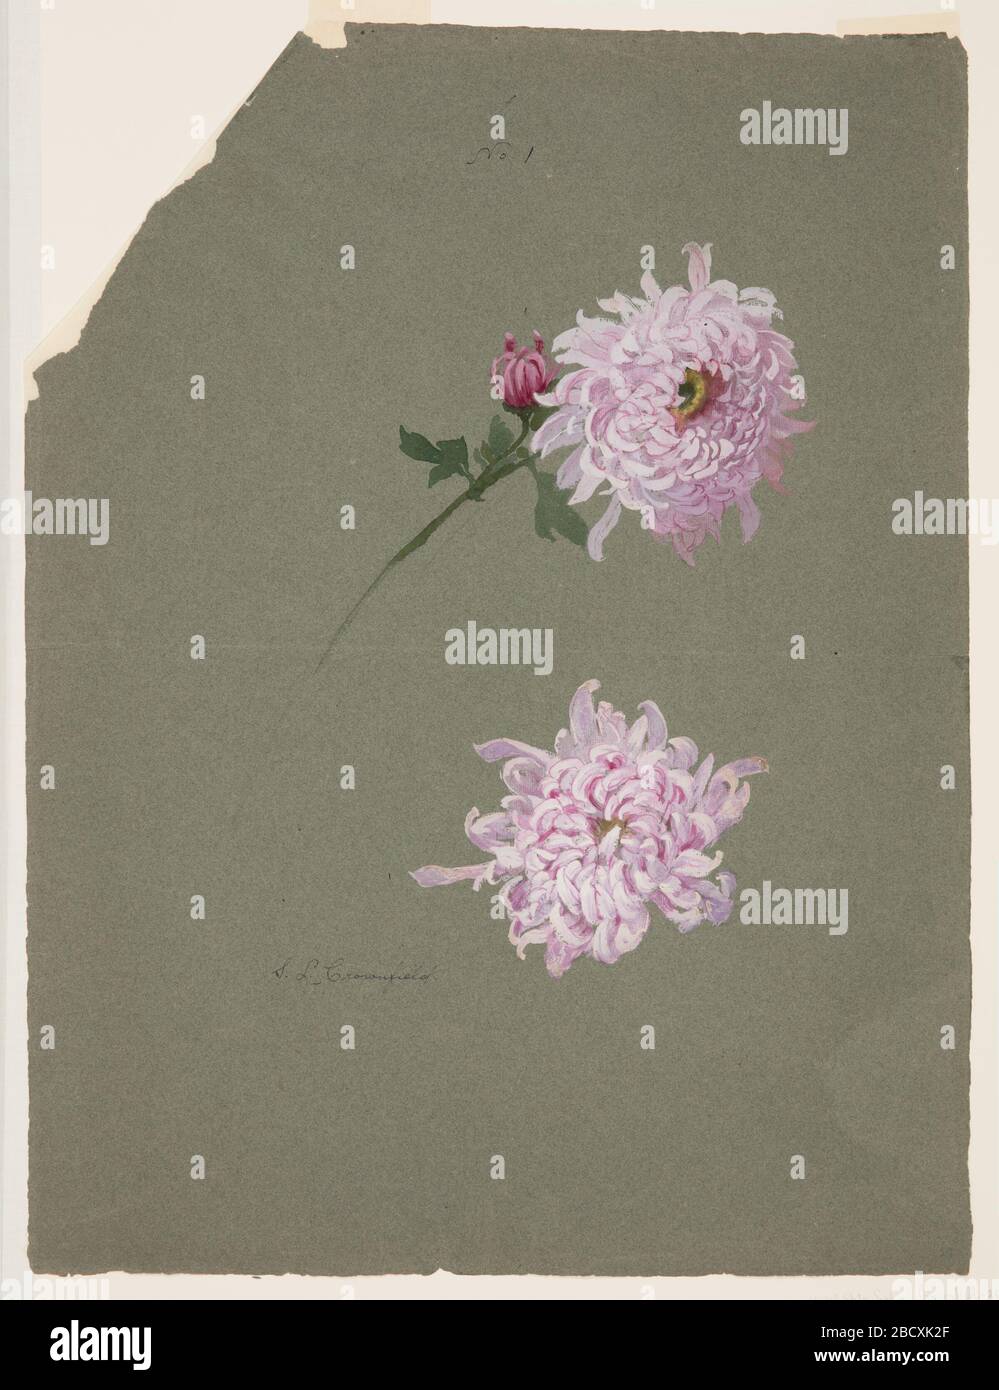 Two Studies of Violet Chrysanthemums. Research in ProgressTwo violet chrysanthemum blossoms, one with stalk, leaf and bud in the center of the page. Two Studies of Violet Chrysanthemums Stock Photo